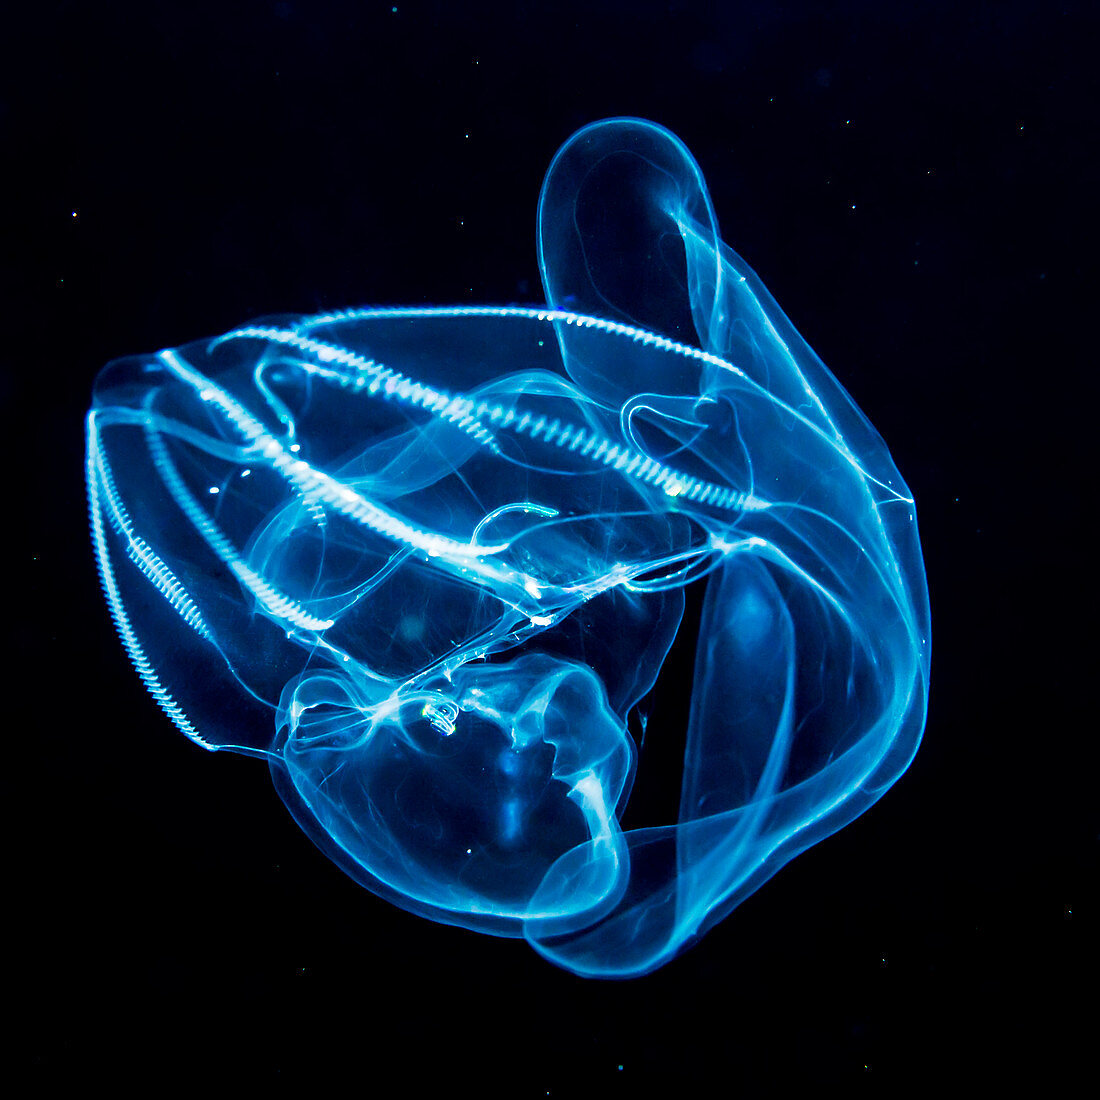 Bolinopsid  comb jelly ctenophore that was photographed several miles offshore of Hawaii Island during a blackwater scuba dive, Island of Hawaii, Hawaii, United States of America